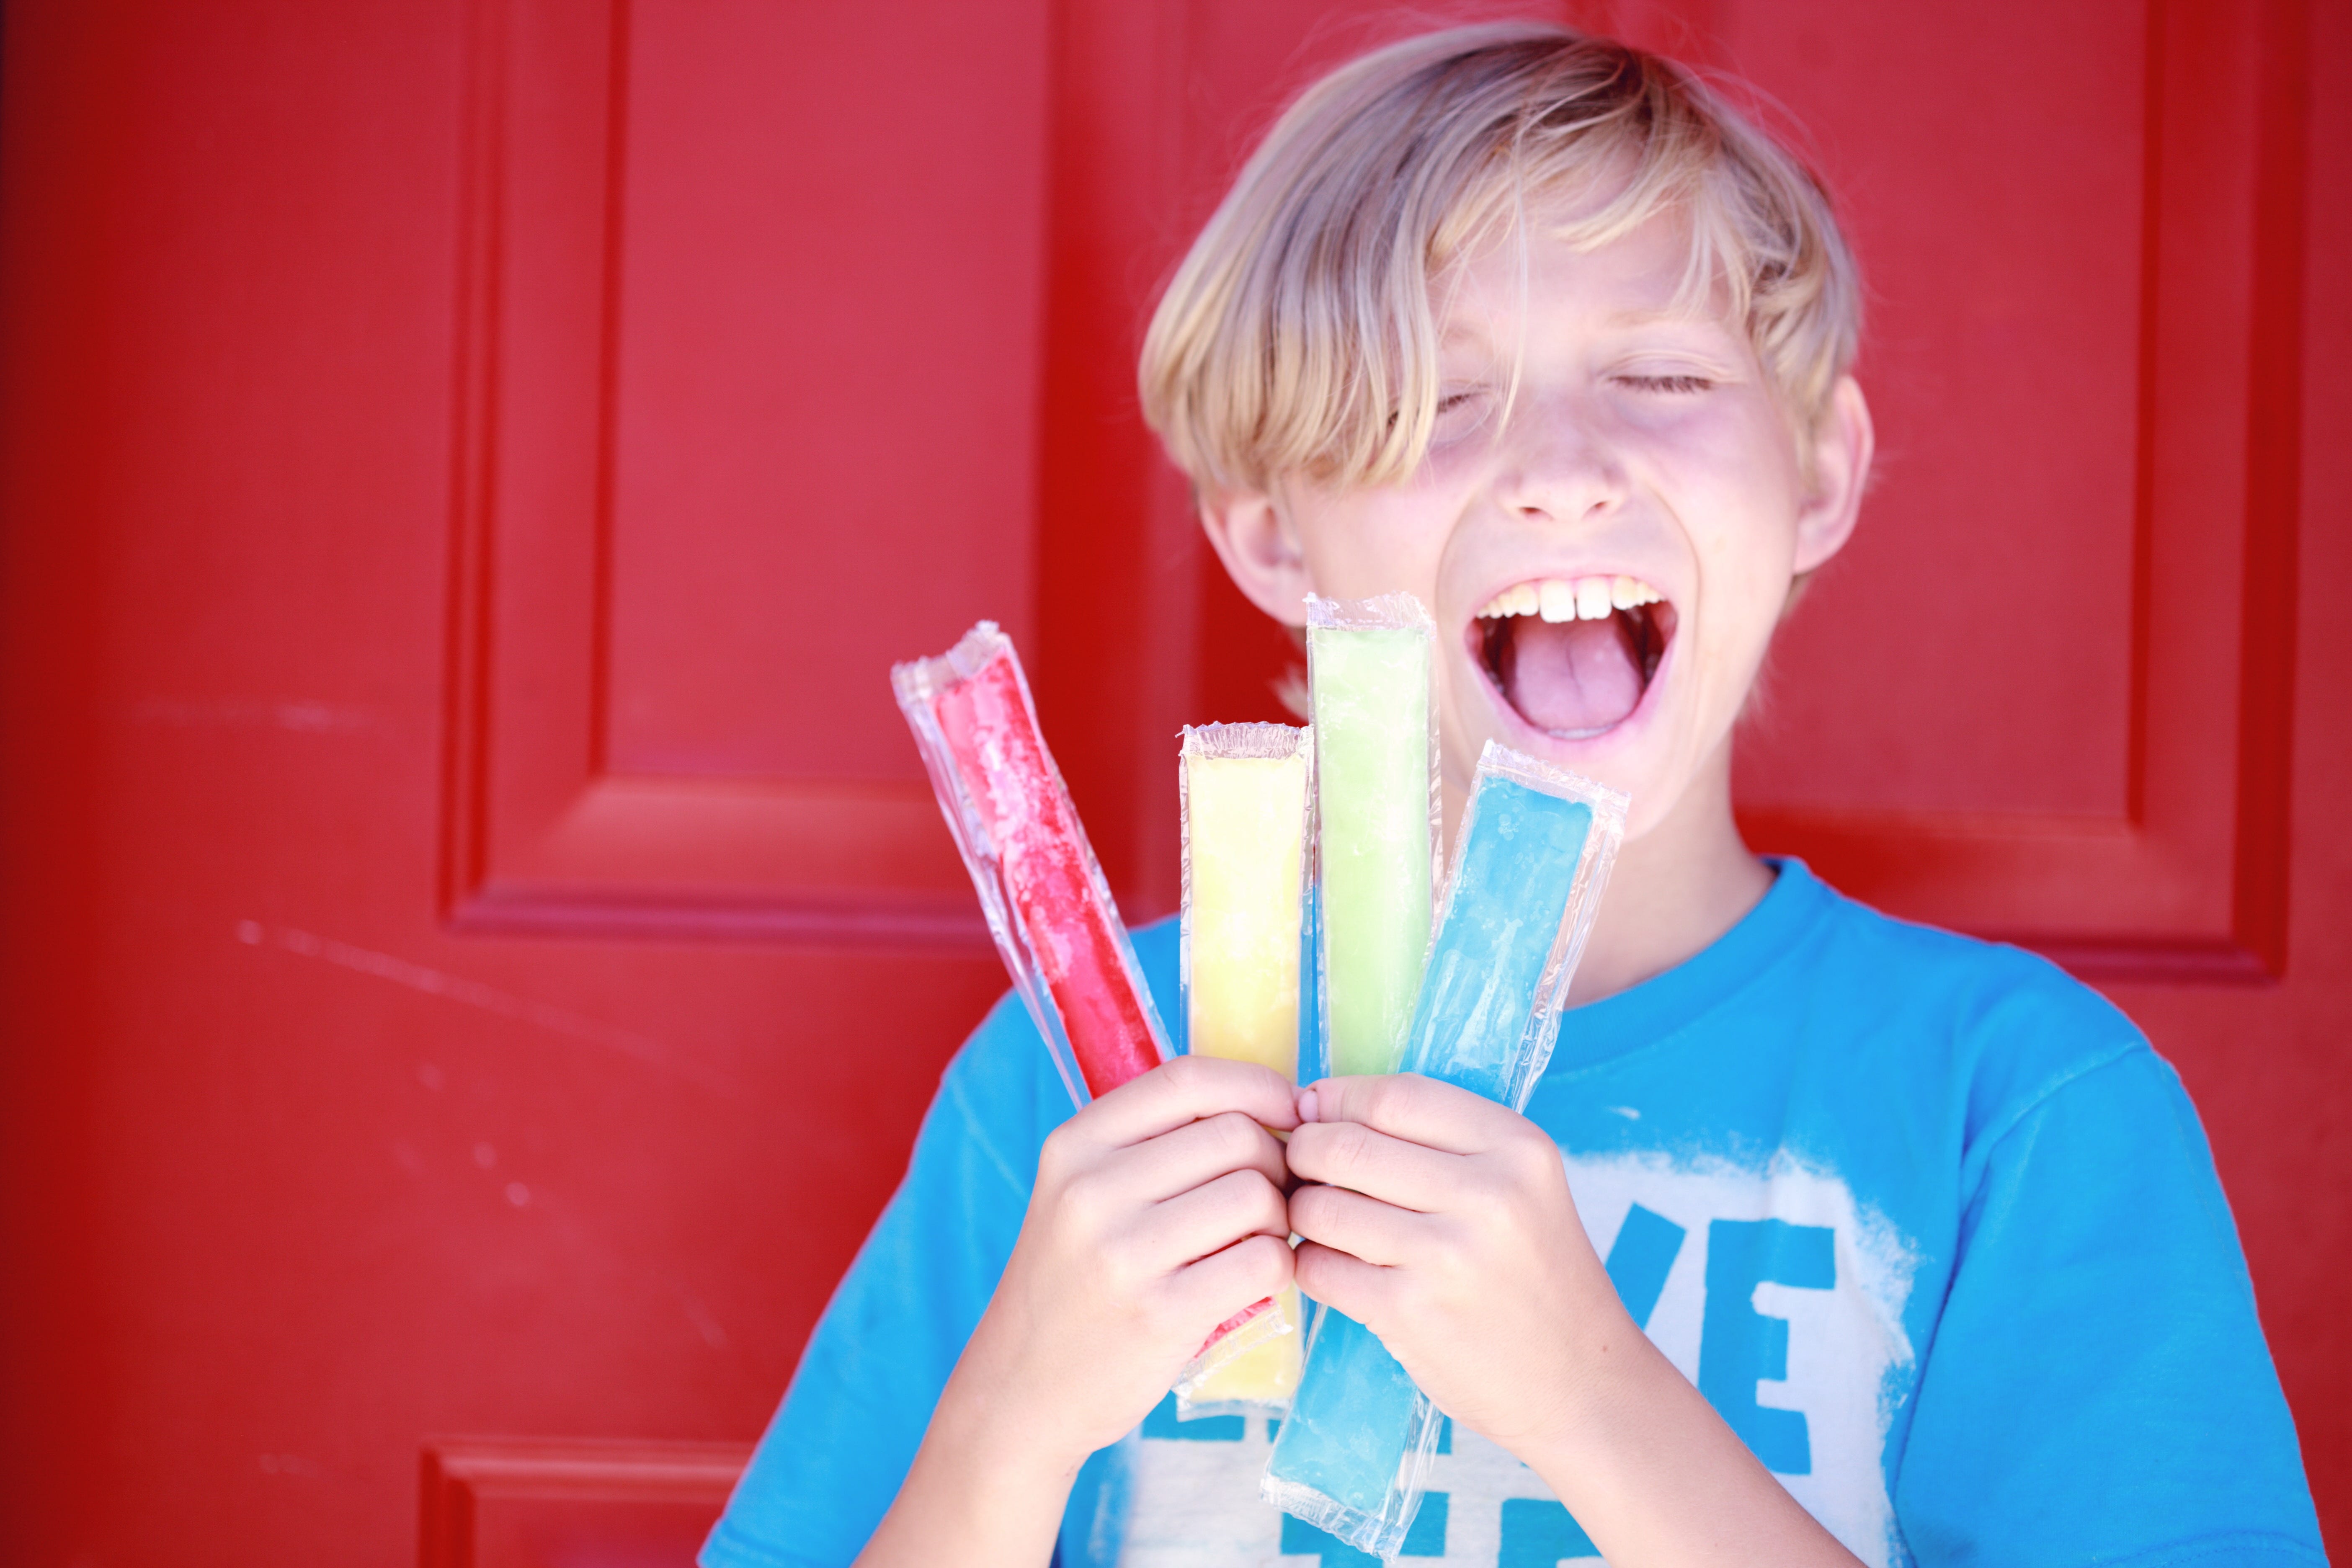 A child standing in front of a red door wearing a blue t-shirt, holding 4 ice pops and smiling 